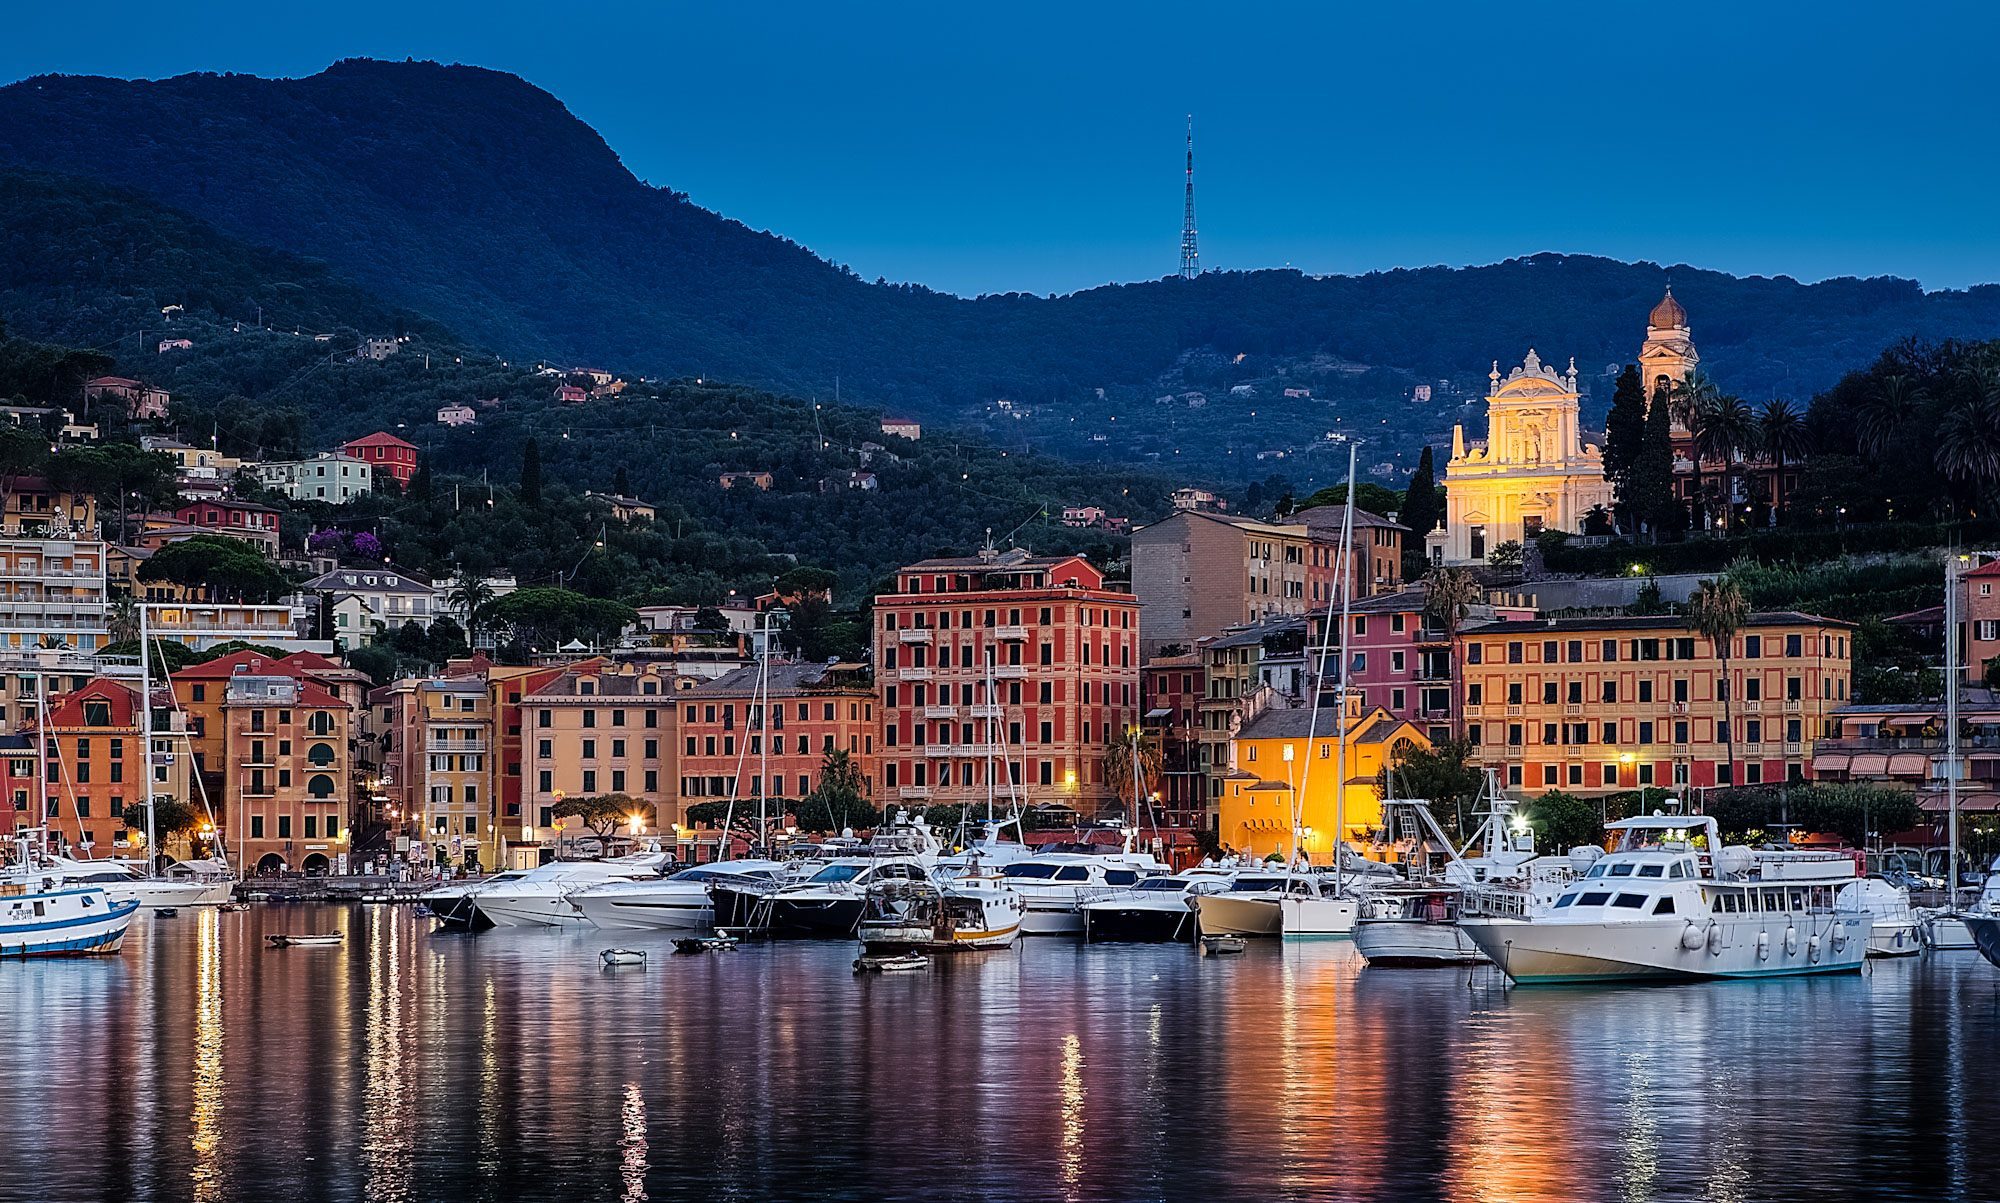 On 26 August Santa Margherita Ligure will host the first G20 Conference dedicated to women’s empowerment